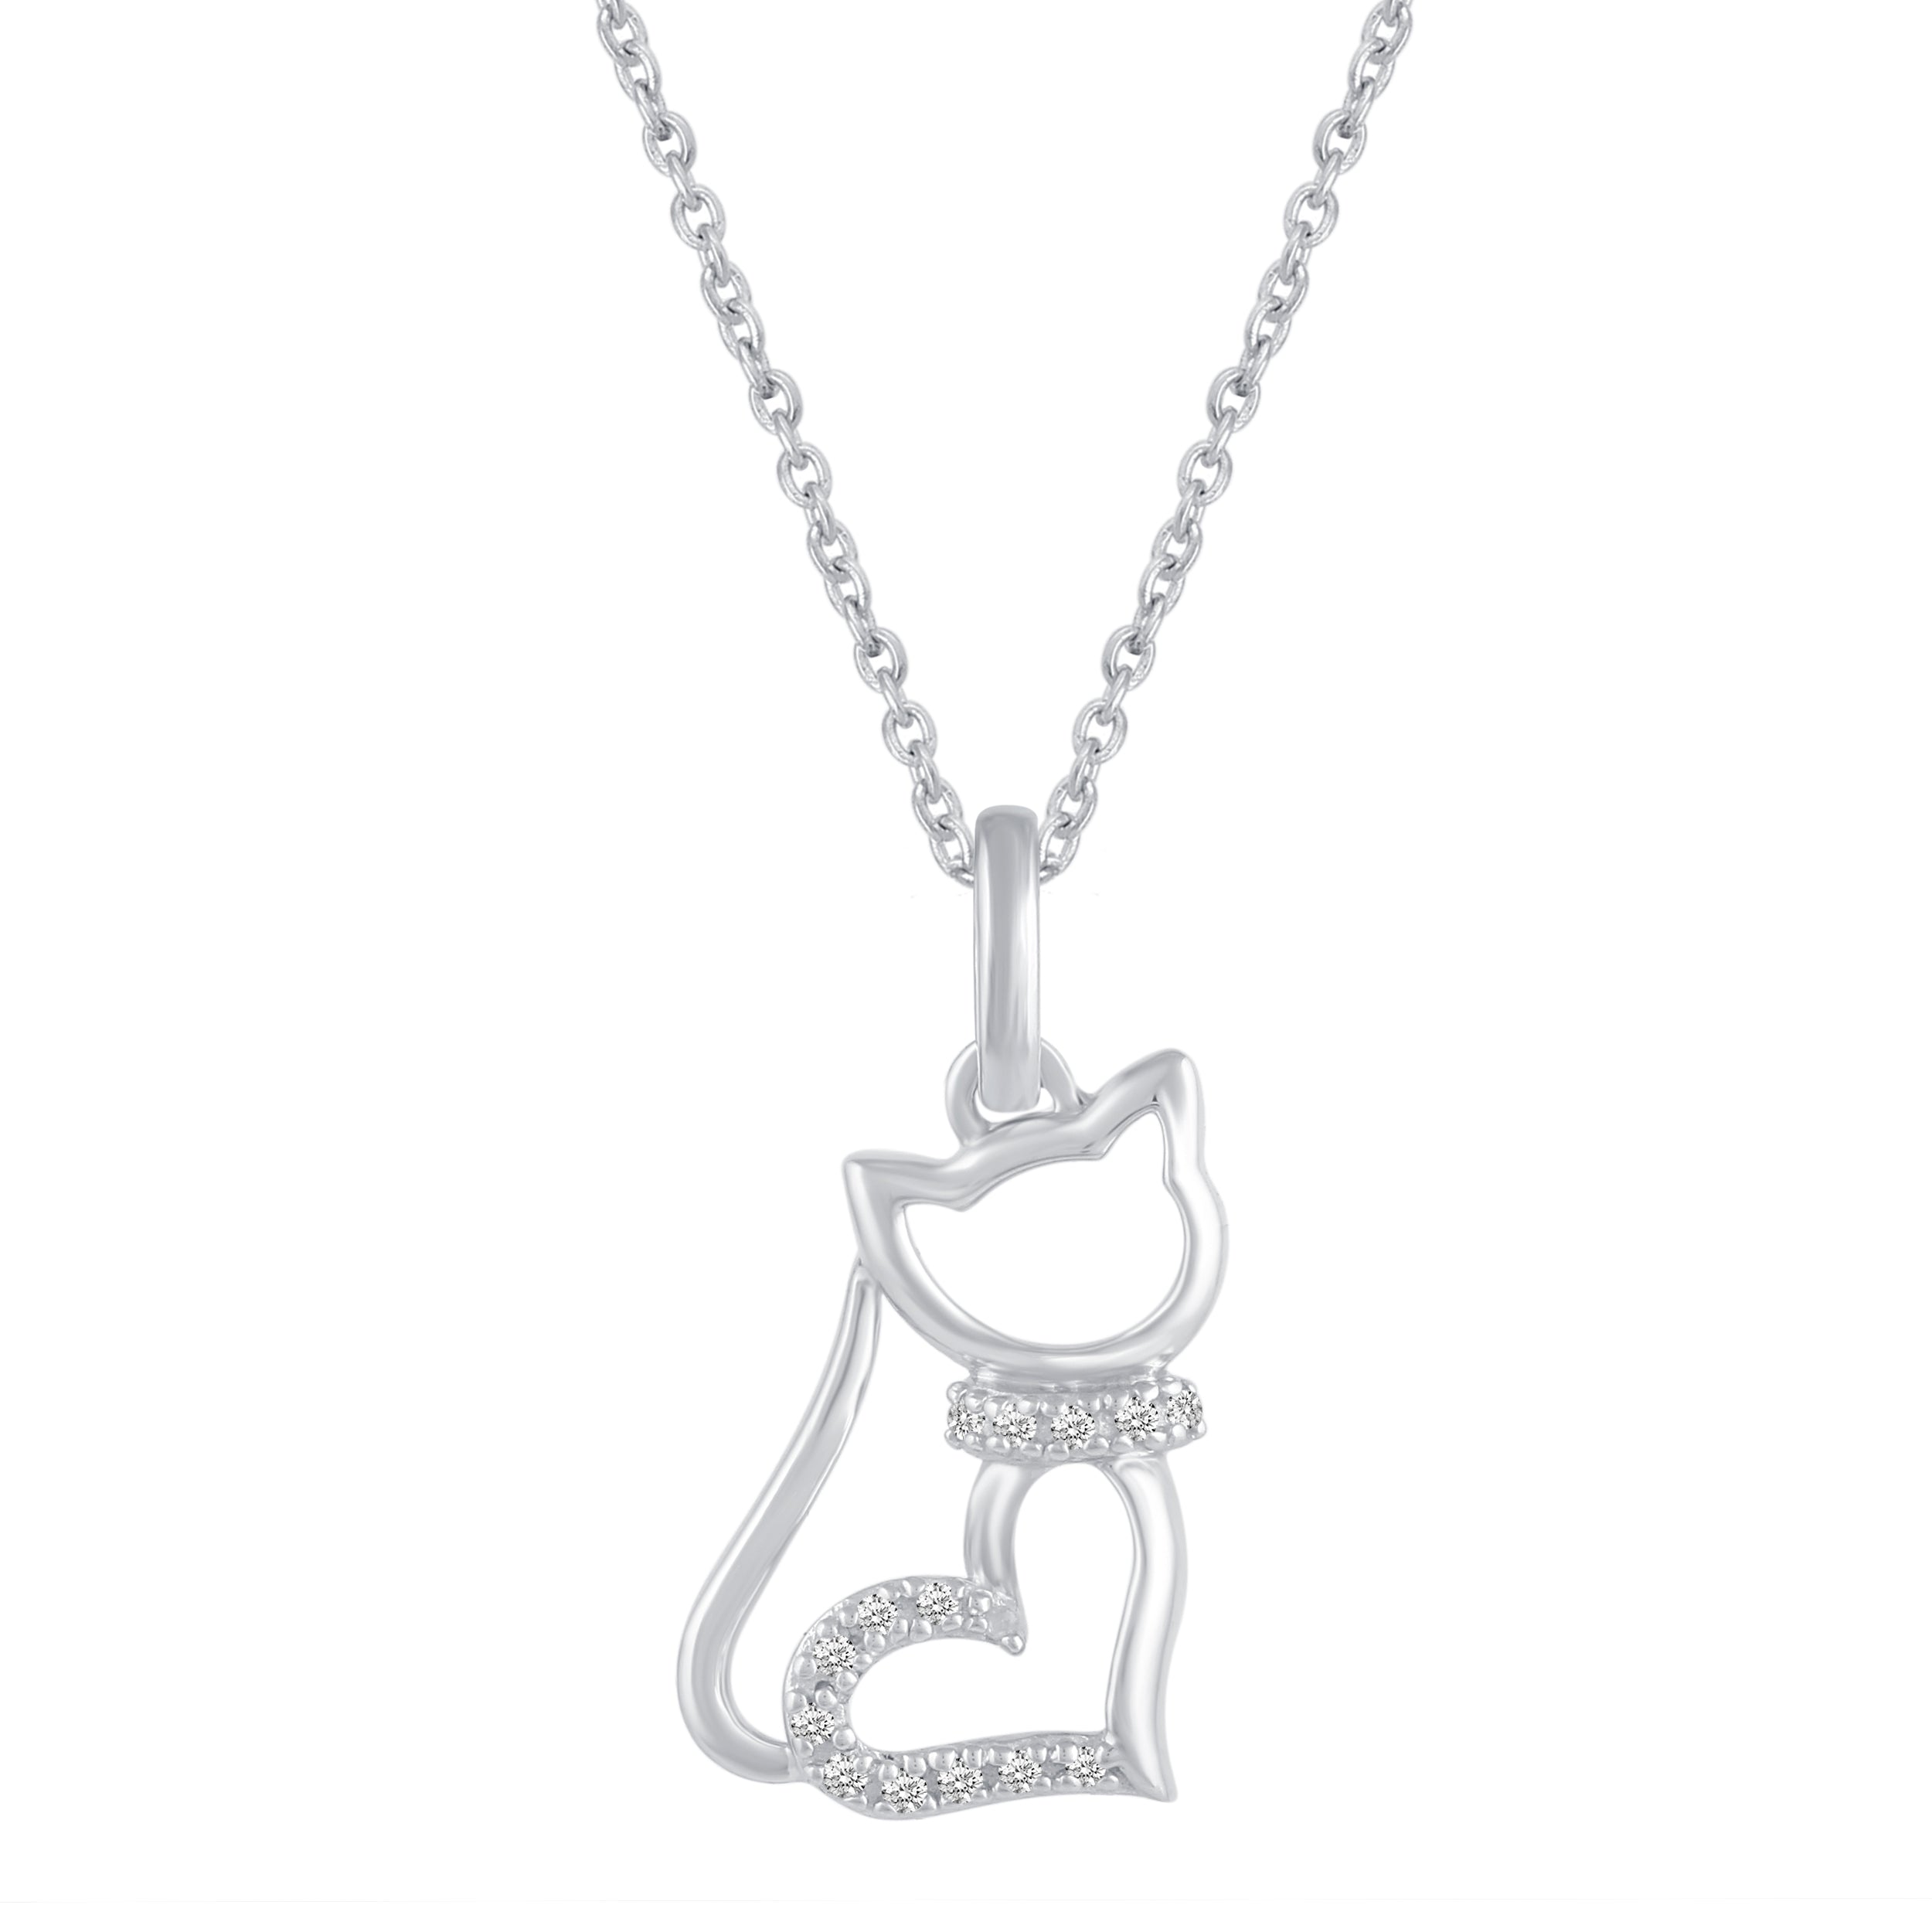 Macy's Diamond Cat Pendant Necklace in 14k Rose Gold and Sterling Silver  (1/5 ct. t.w.) - Macy's